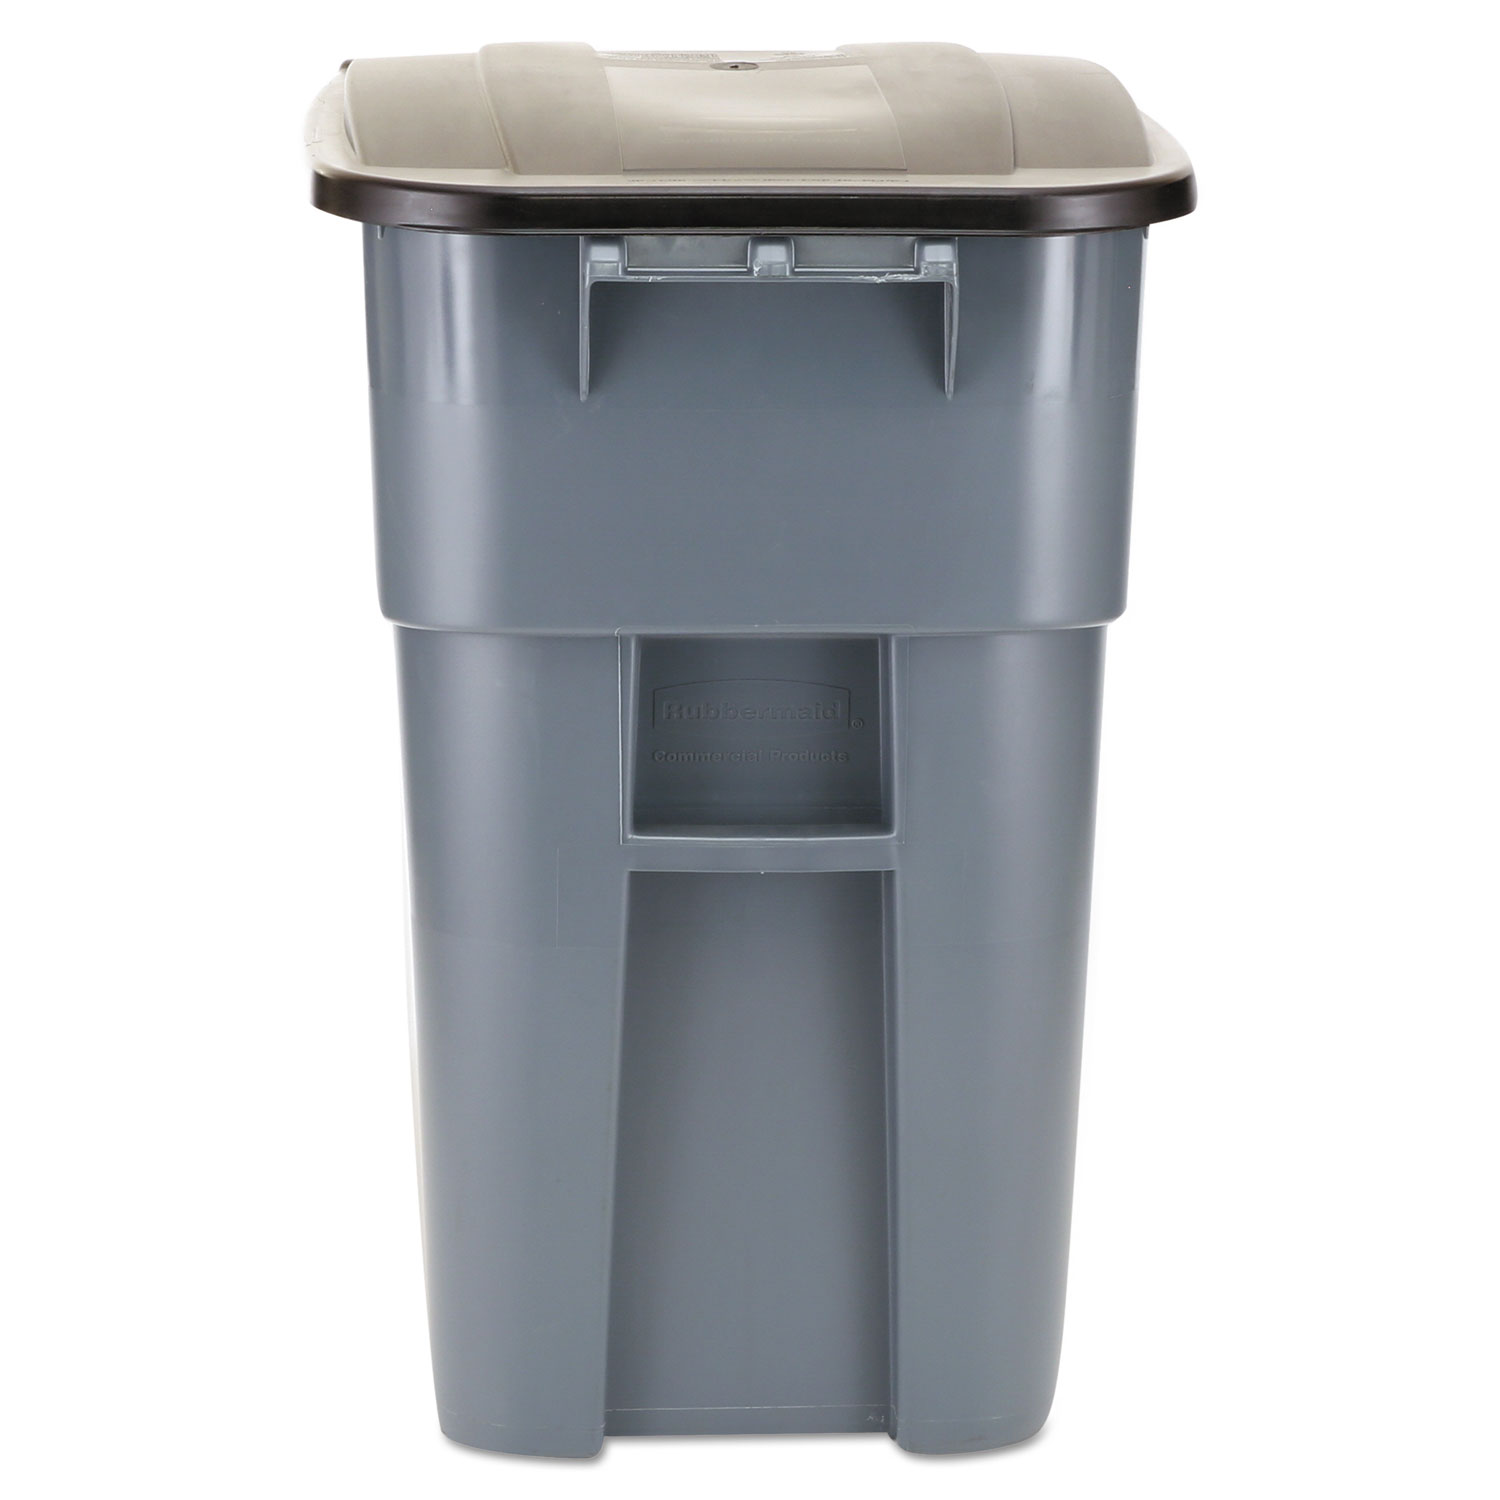  Rubbermaid Commercial FG9W2700GRAY Brute Rollout Container, Square, Plastic, 50 gal, Gray (RCP9W27GY) 